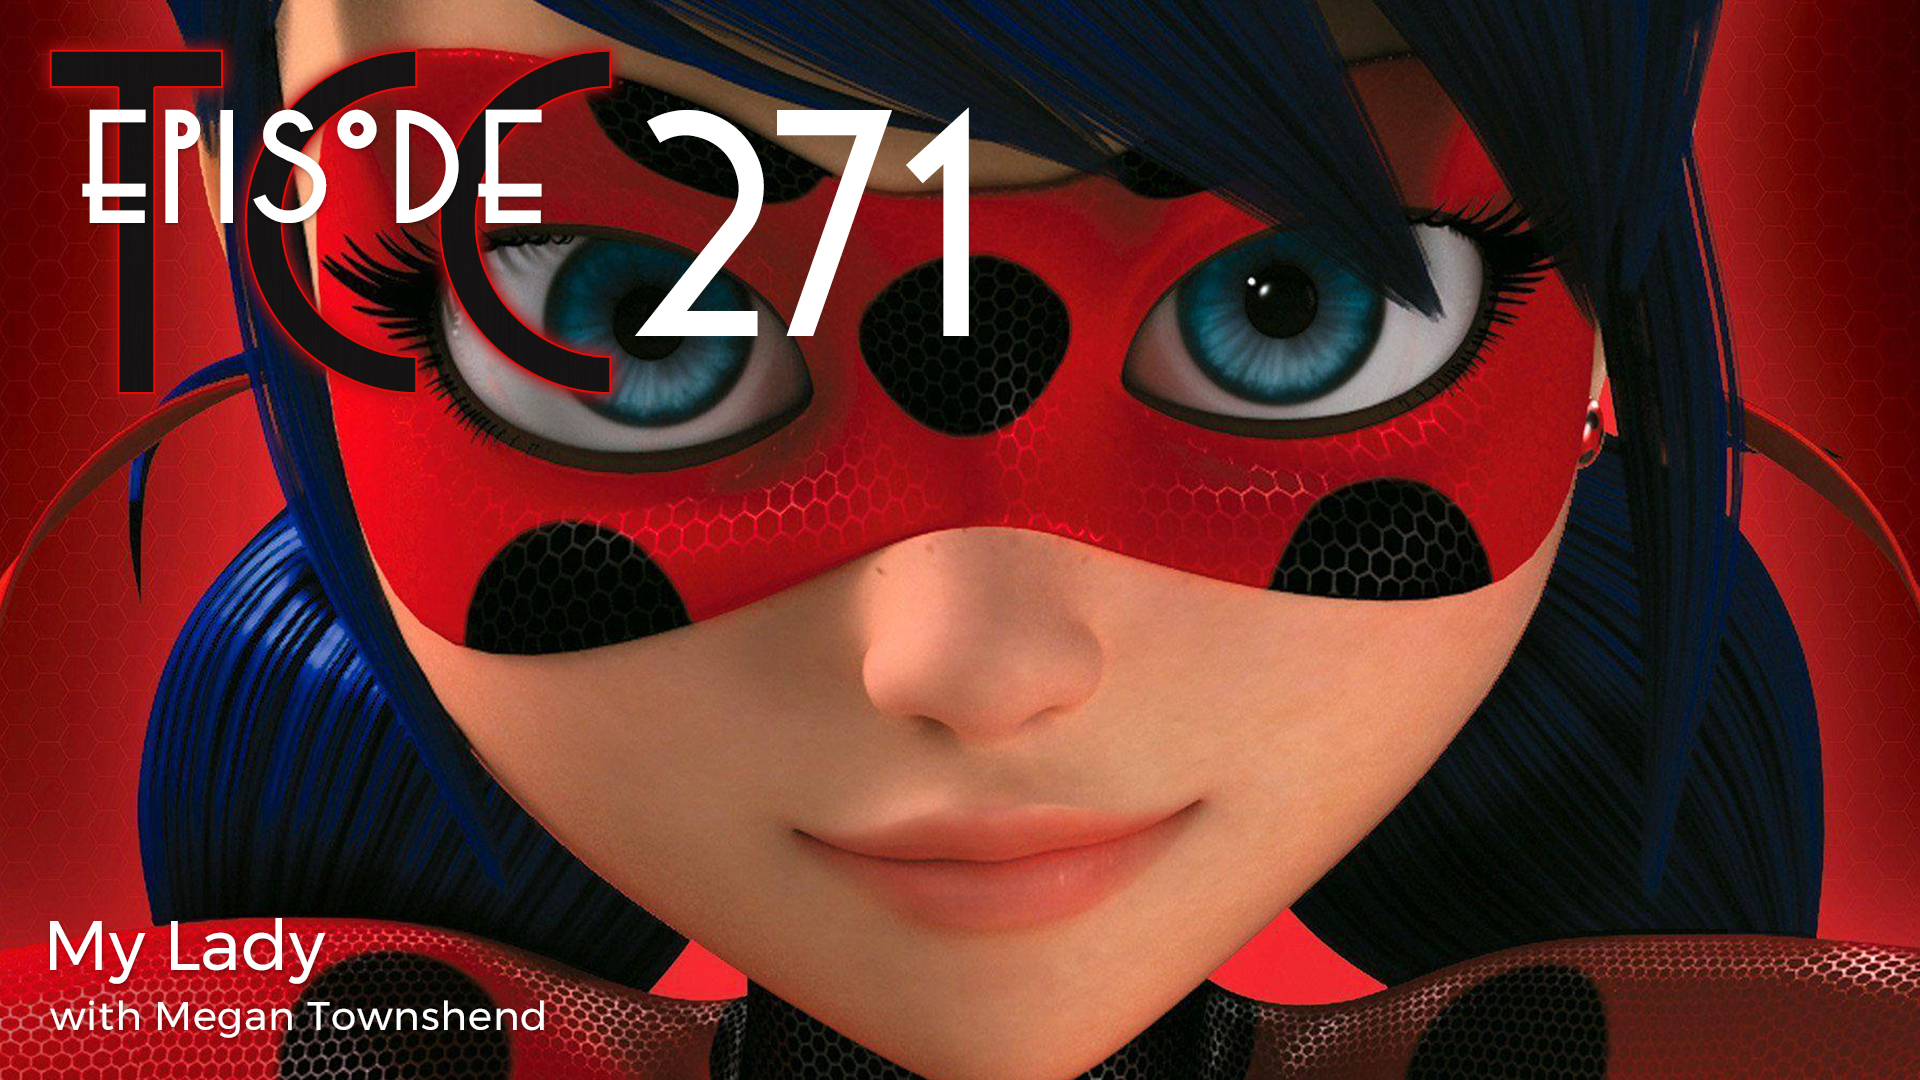 The Citadel Cafe 271: My Lady